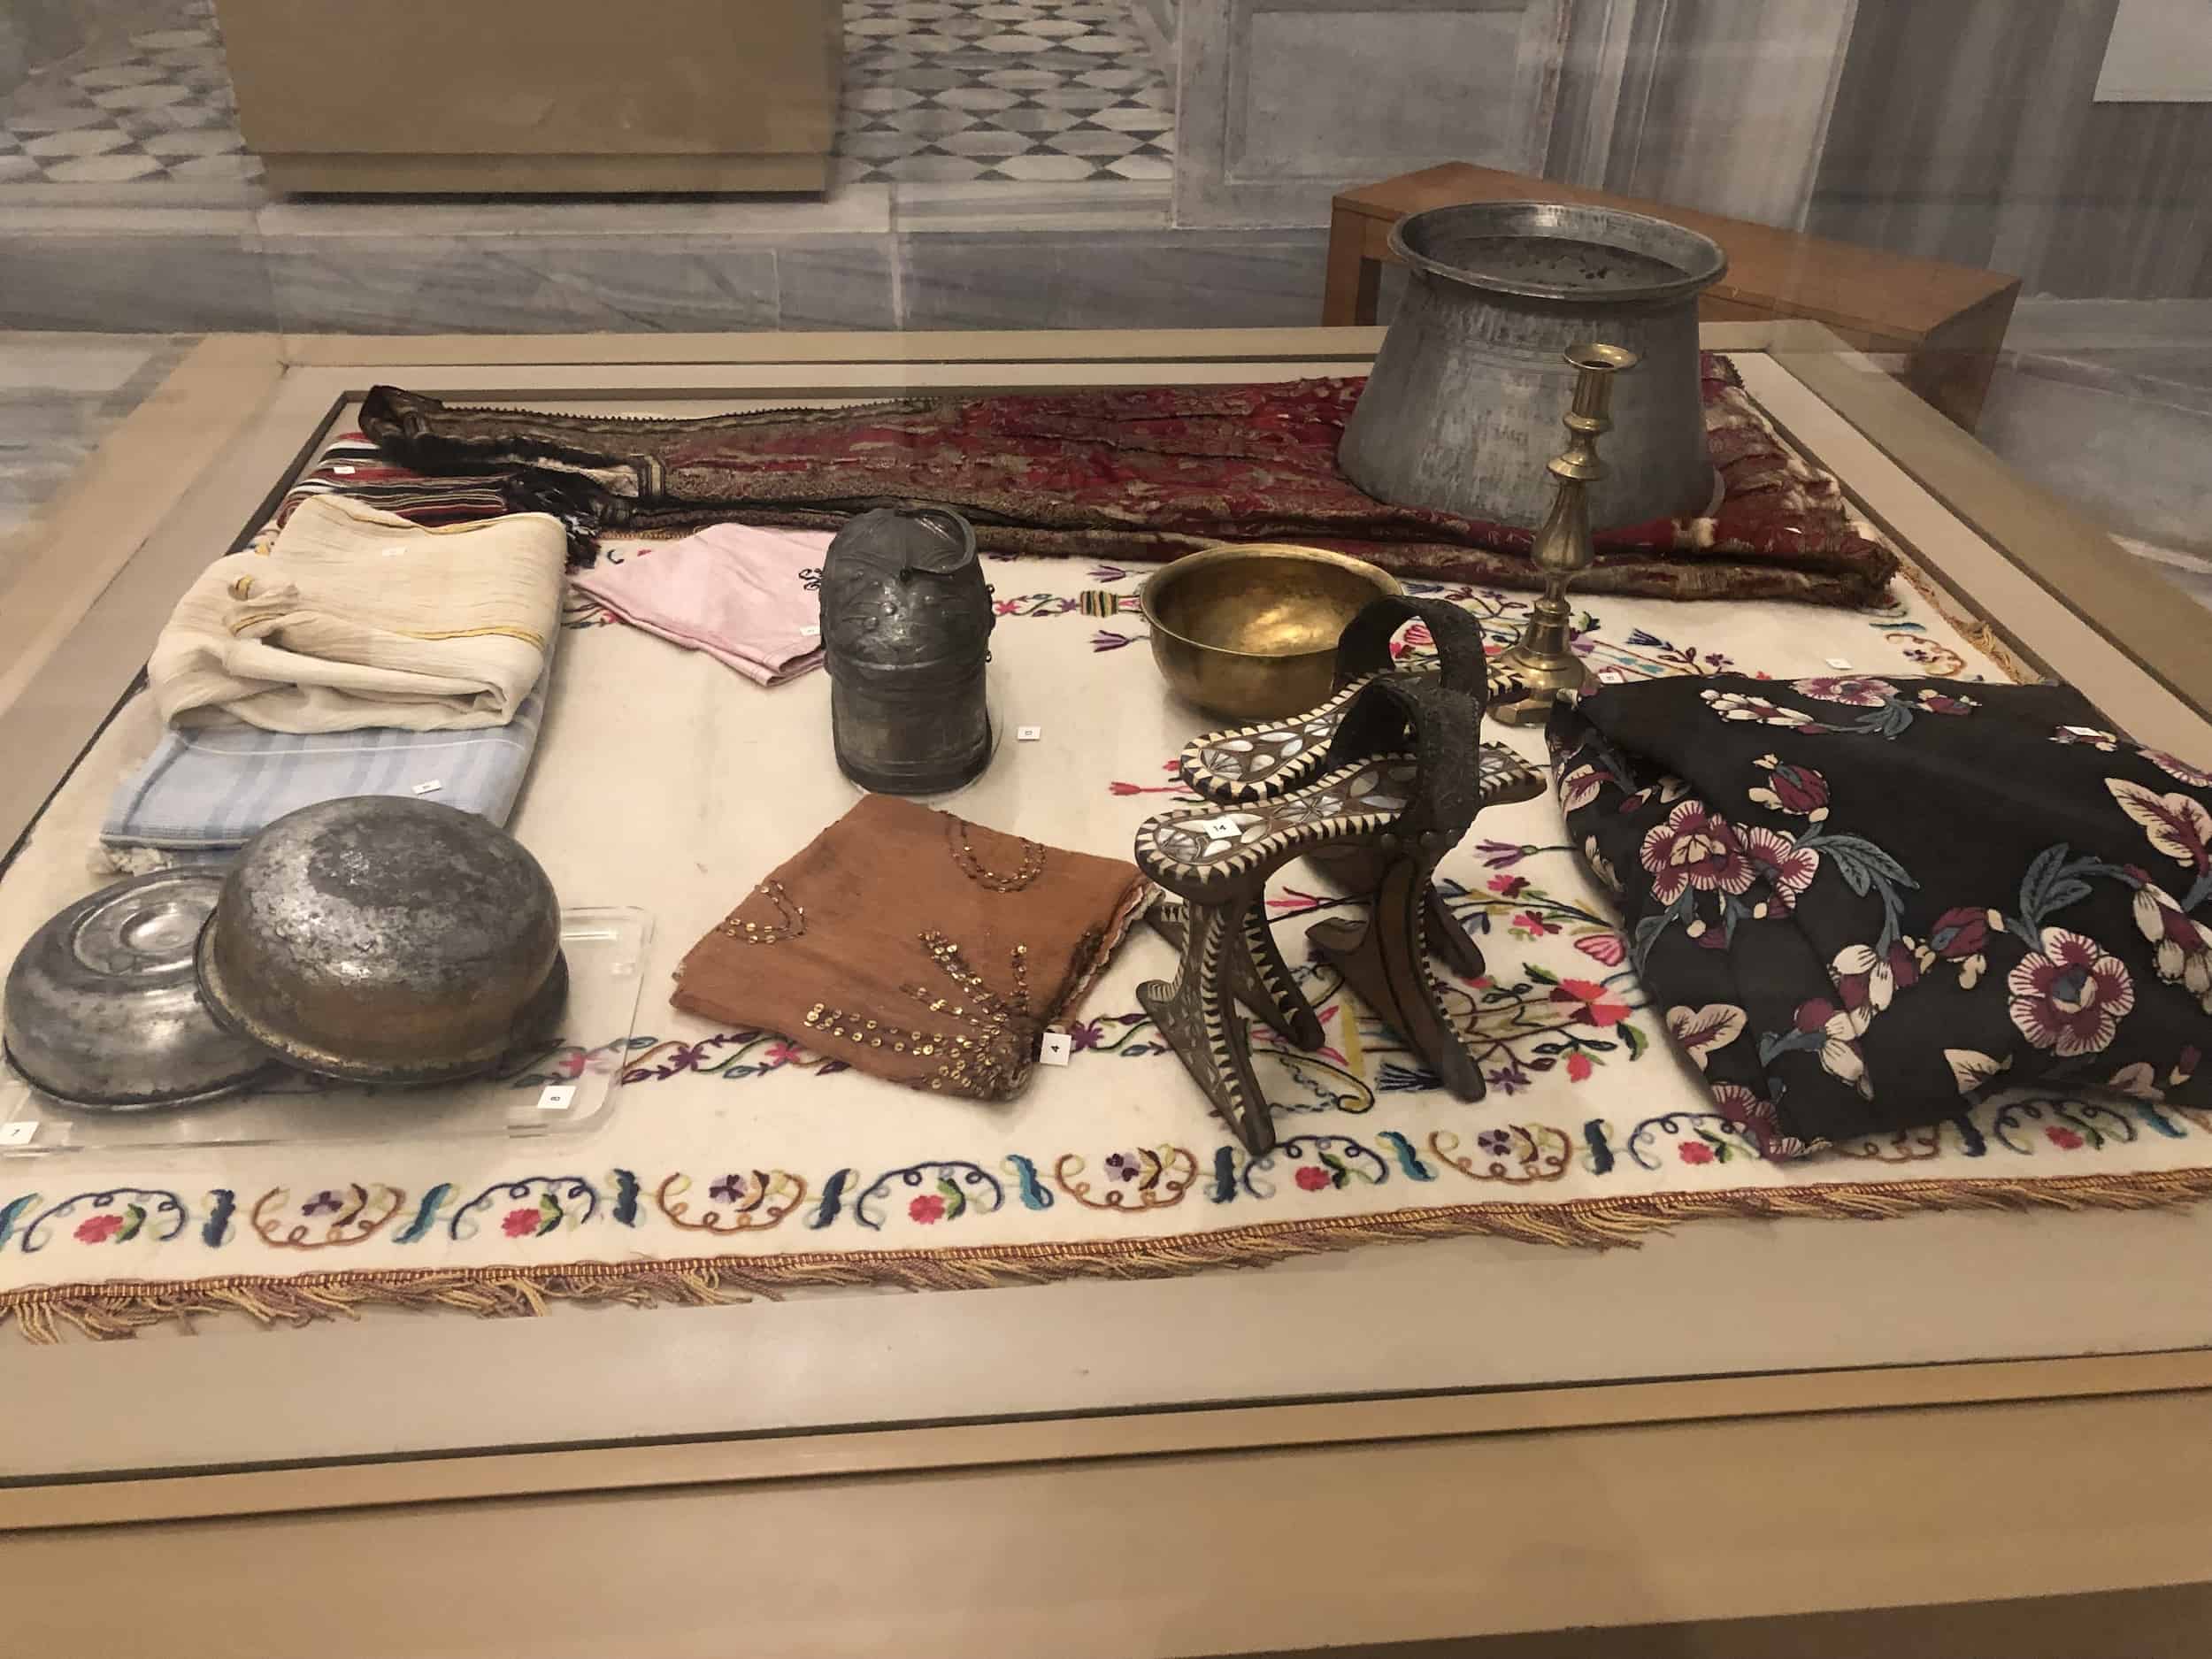 Ethnographic items in the men's warm room at the Bayezid II Hamam